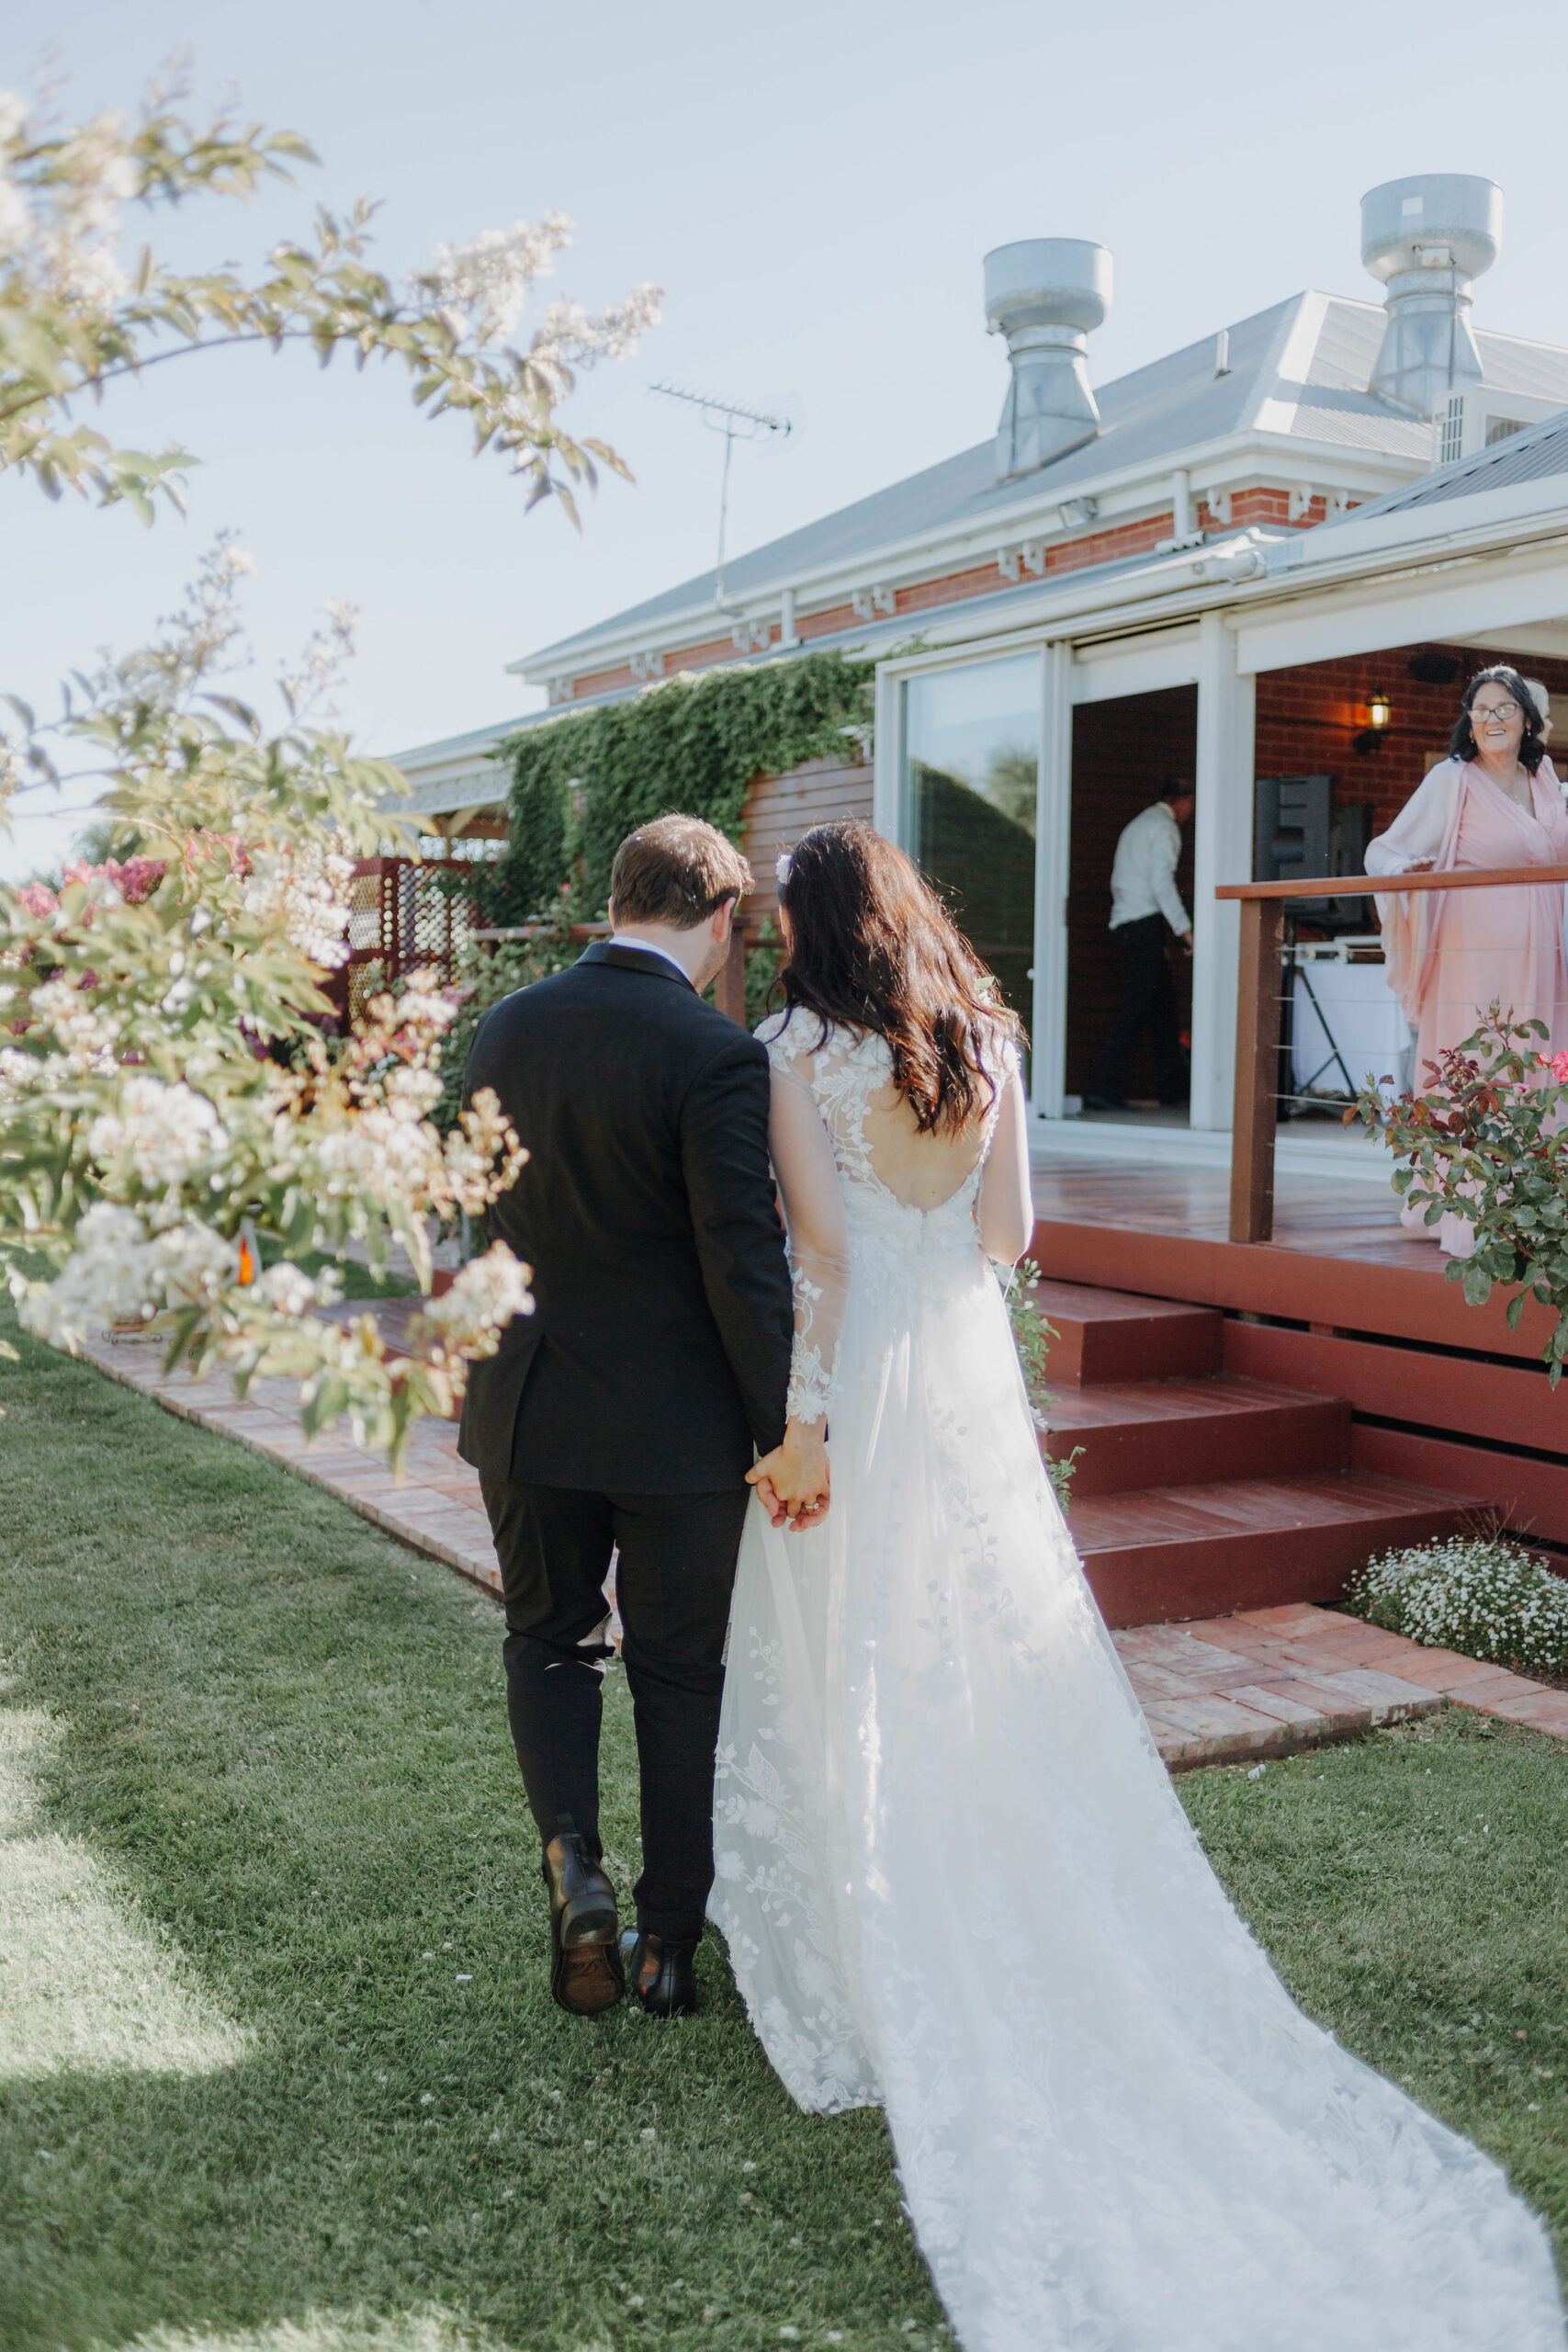 Modern romantic wedding of Amy and Brandon at Olivehouse Function Centre, Kialla. Photo by Veri Photography.